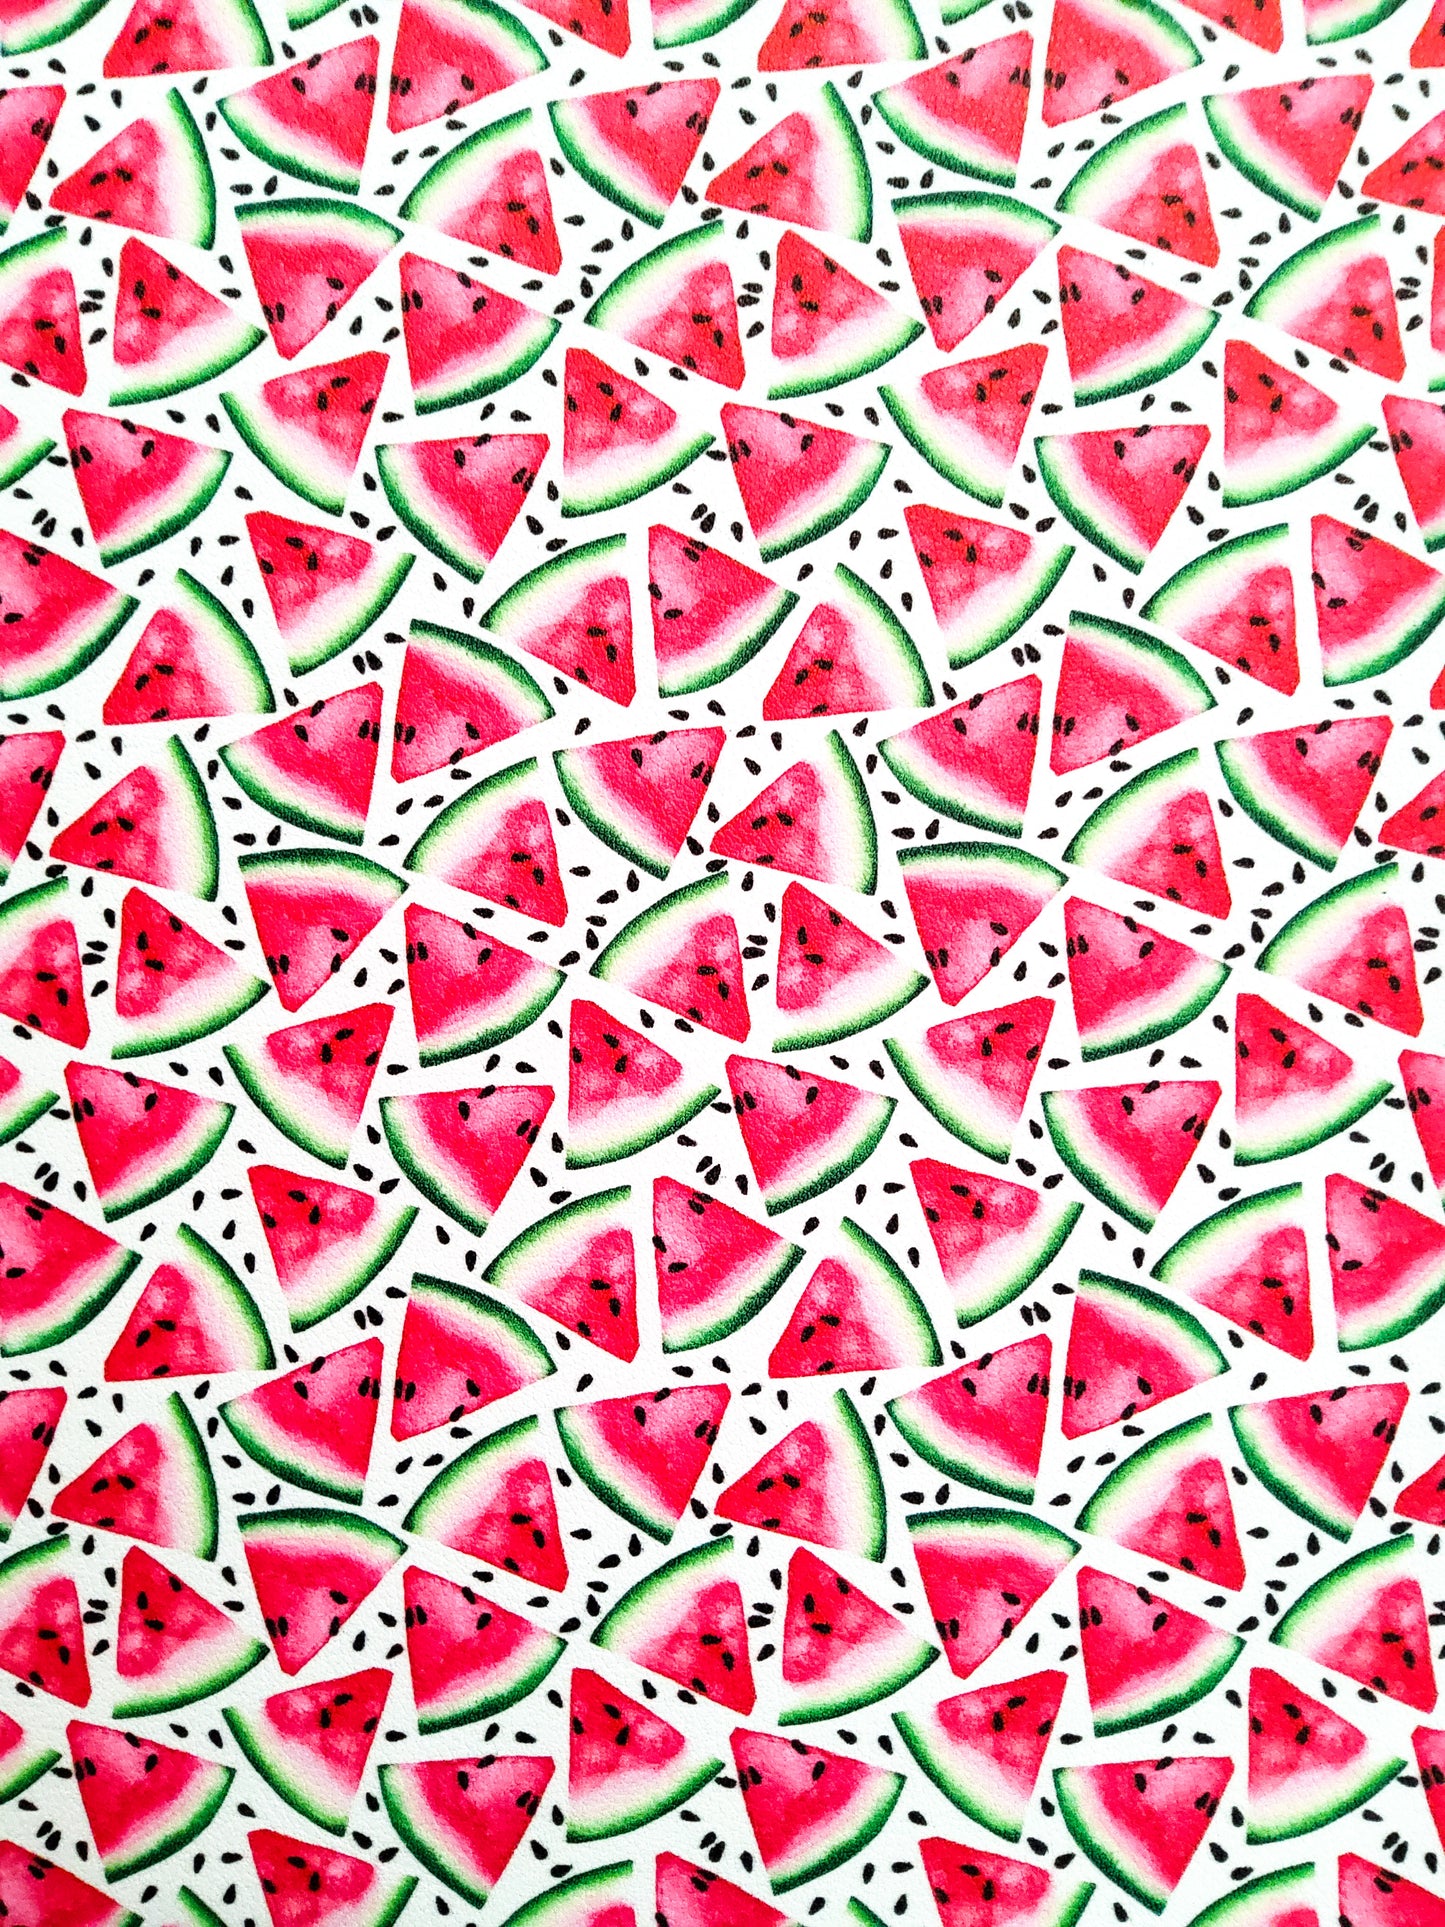 Watermelon Slices and Seeds 9x12 faux leather sheet